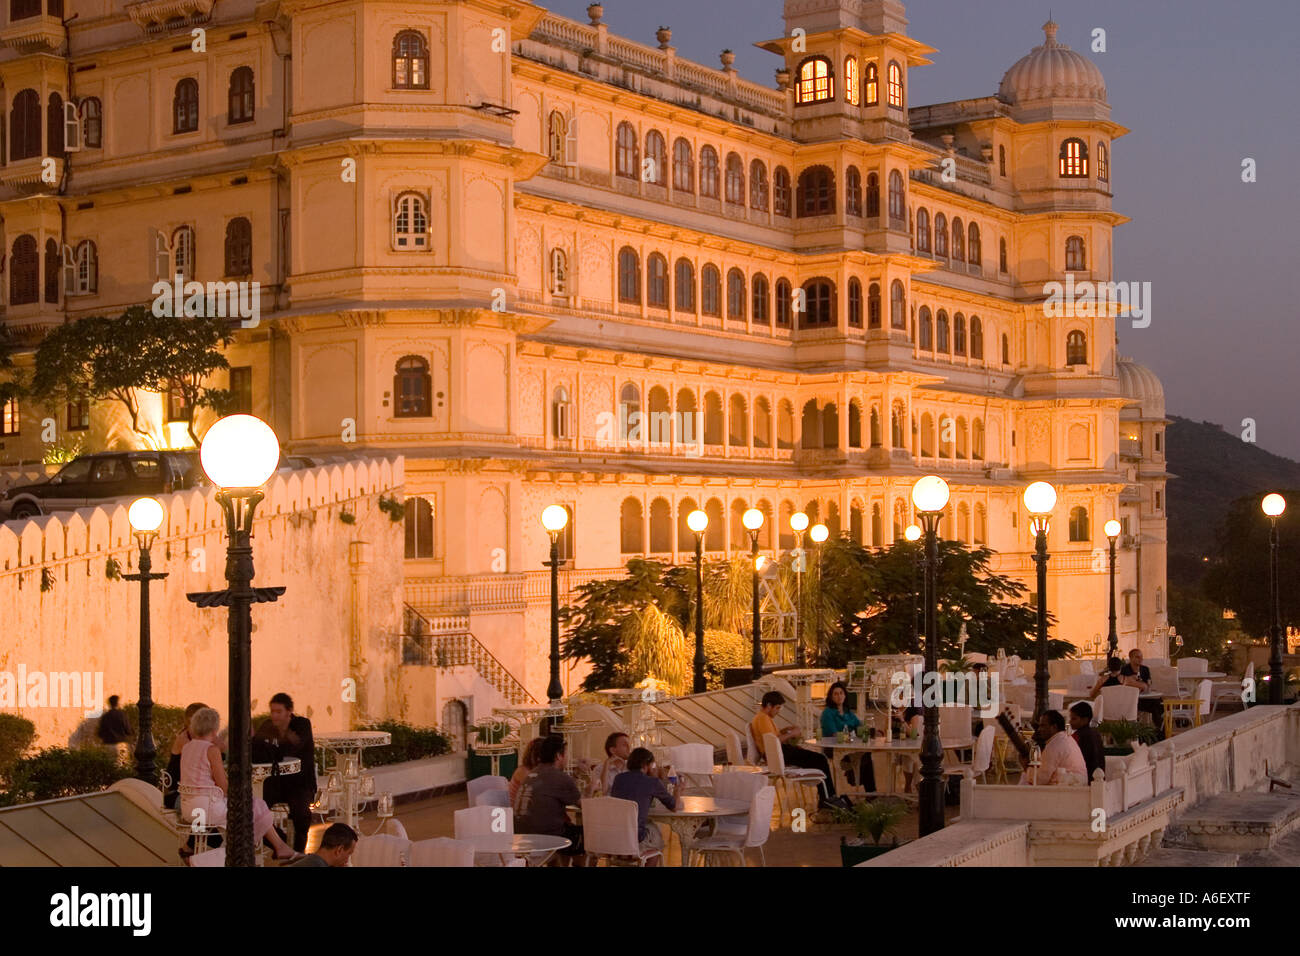 City Palace in Udaipur, India (c) Guenter Gollnick, email: info@scenic-vision.de. Stock Photo